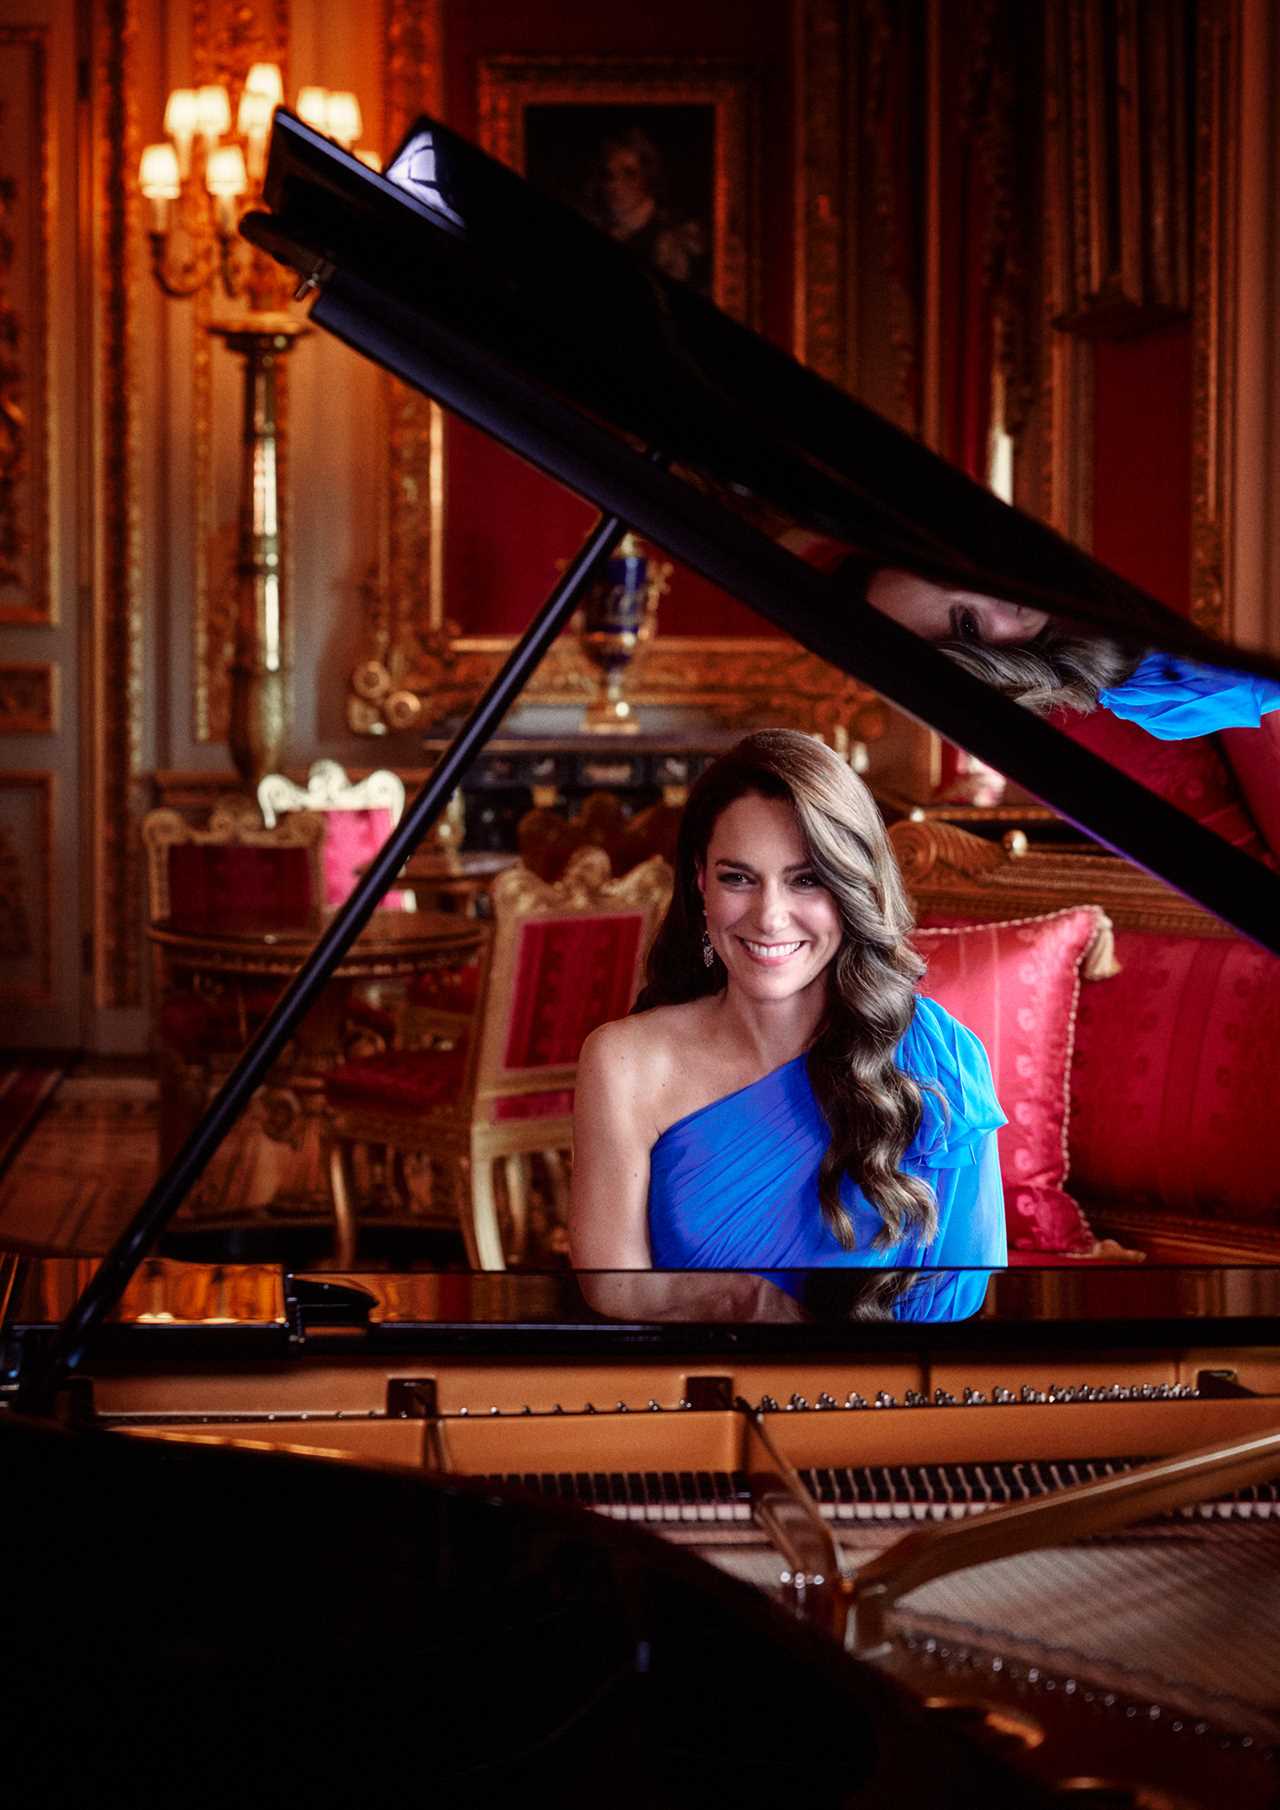 Eurovision surprise as the Princess of Wales Kate Middleton plays piano in stunning show opening